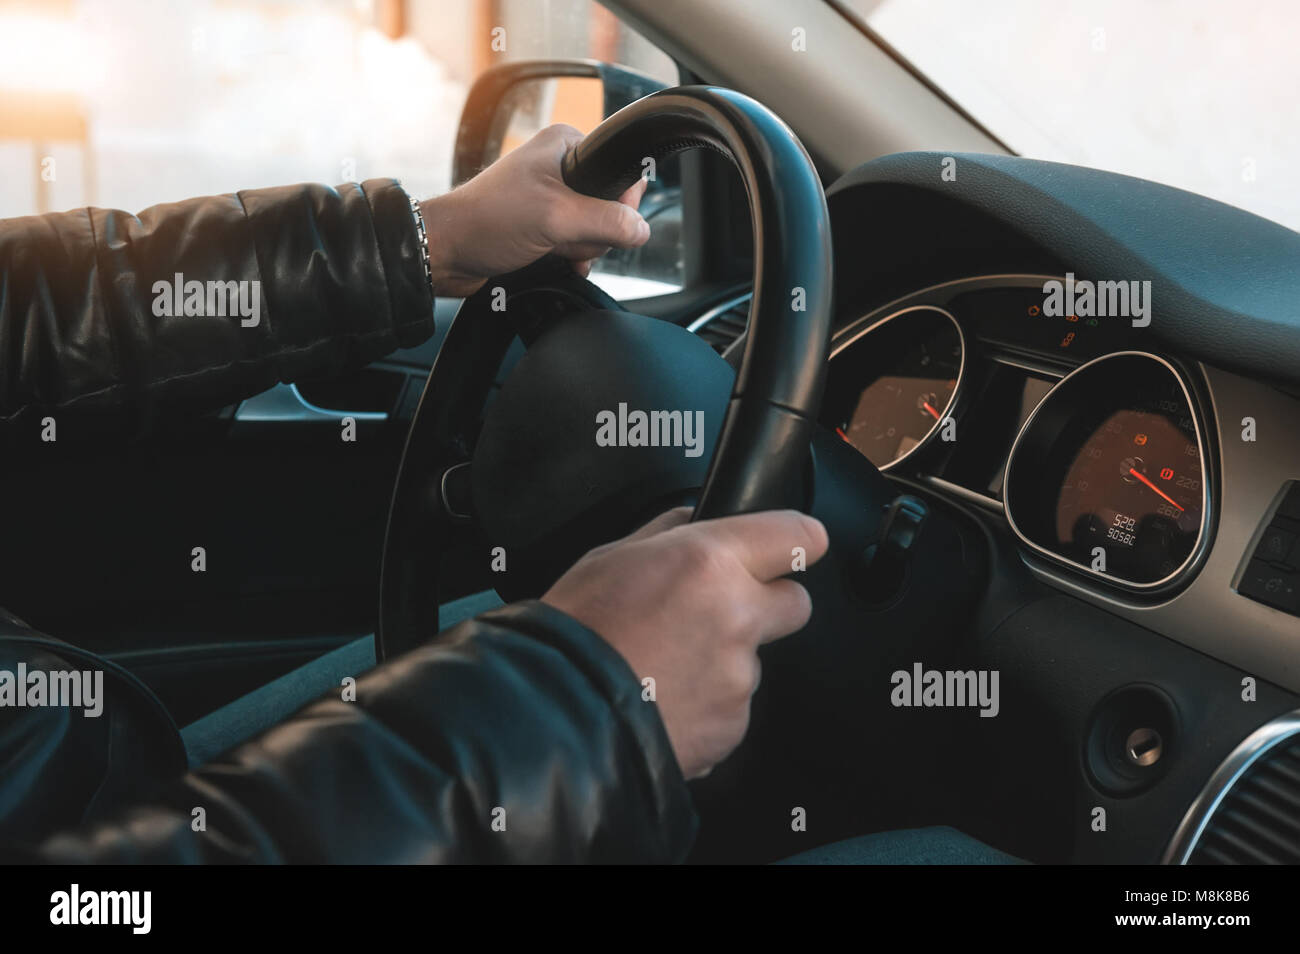 A large man in a leather jacket and jeans sits behind the wheel of a car. Stock Photo